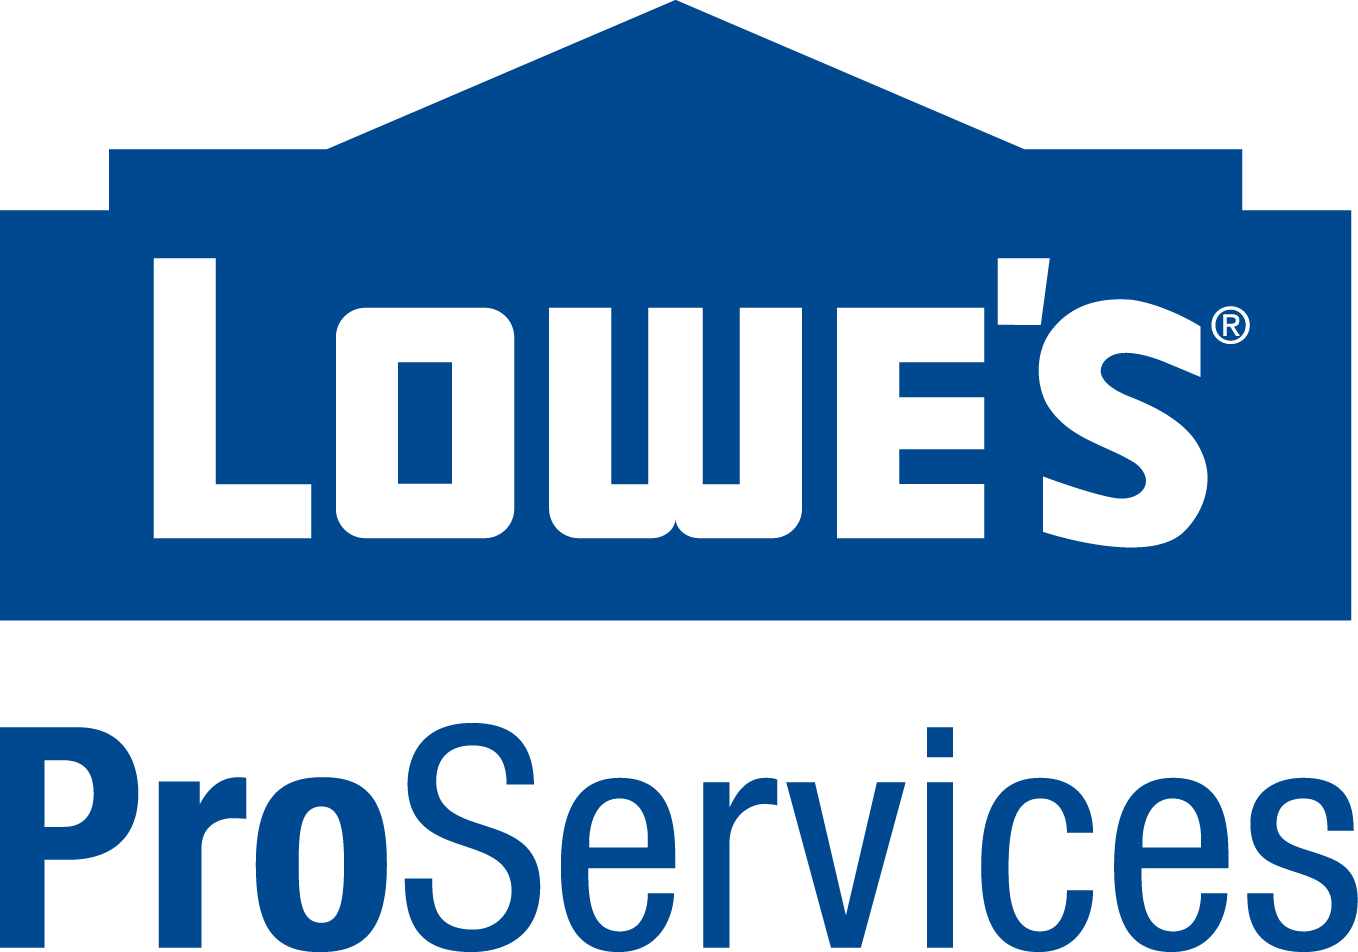 Lowe's Logo - Lowe's Home Improvement: Lowe's Official Logos